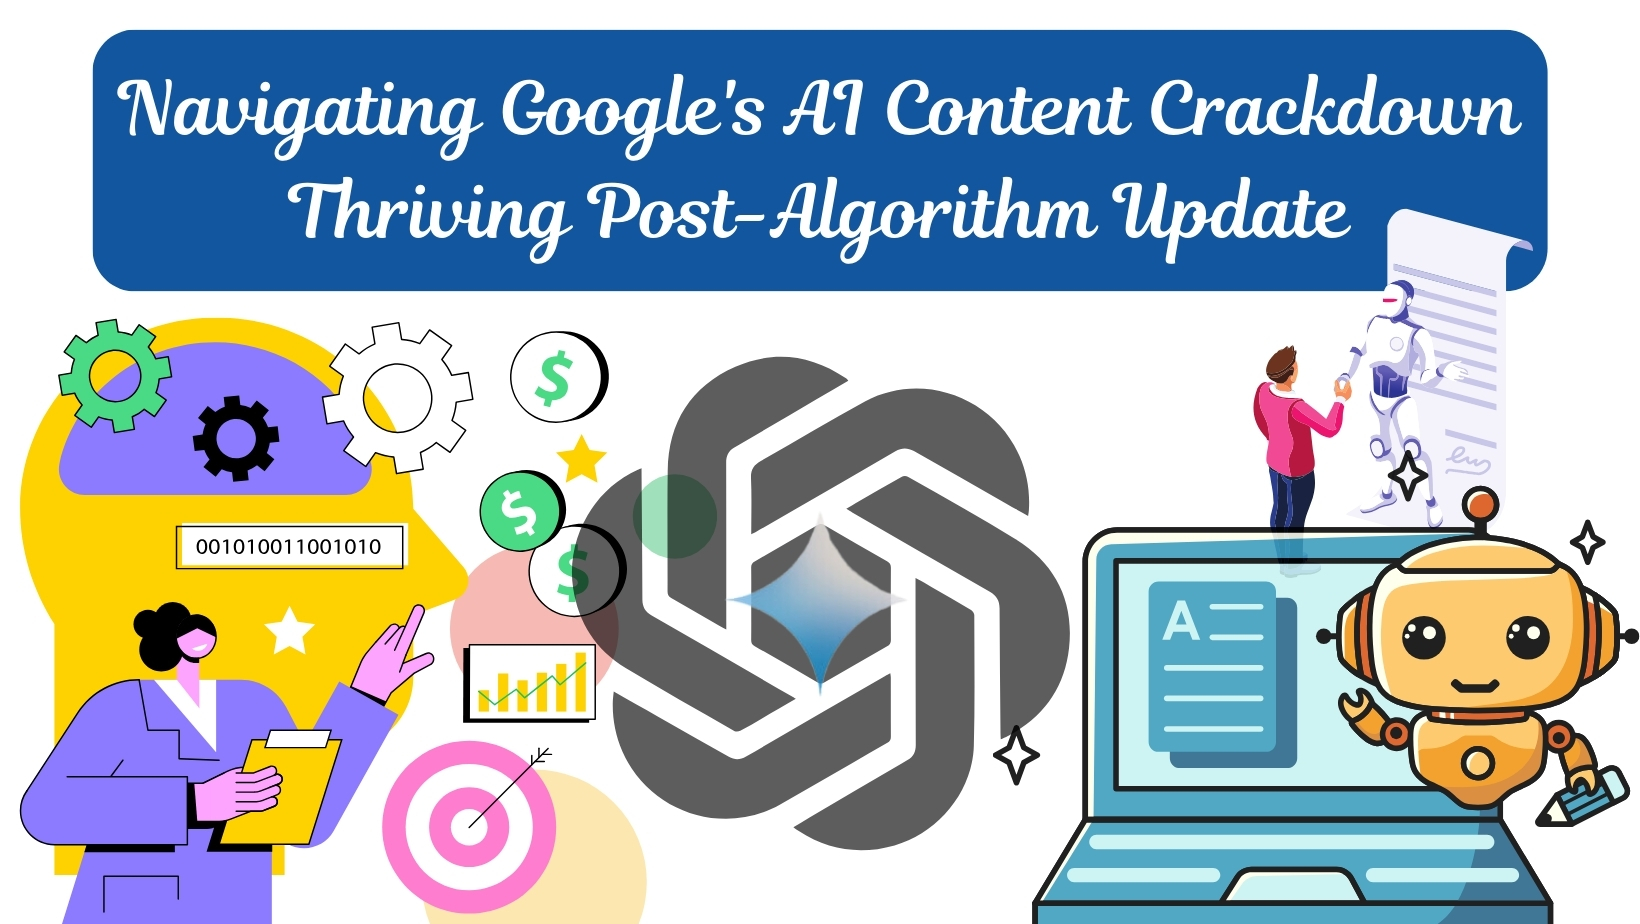 Navigating Google’s AI Content Crackdown Thriving Post-Algorithm Update